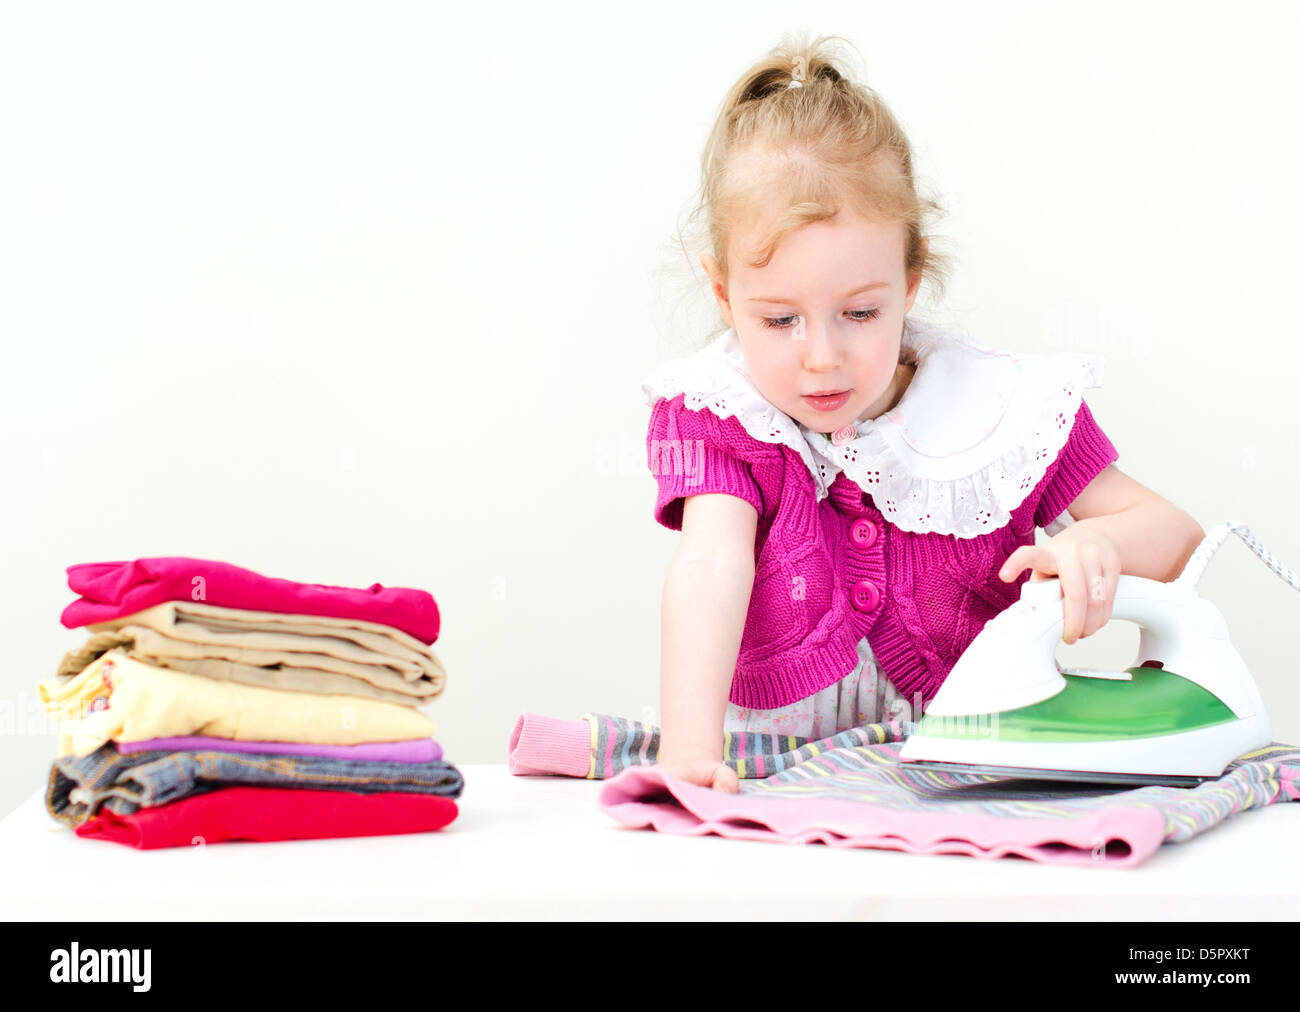 Cute little girl ironing clothes Stock Photo